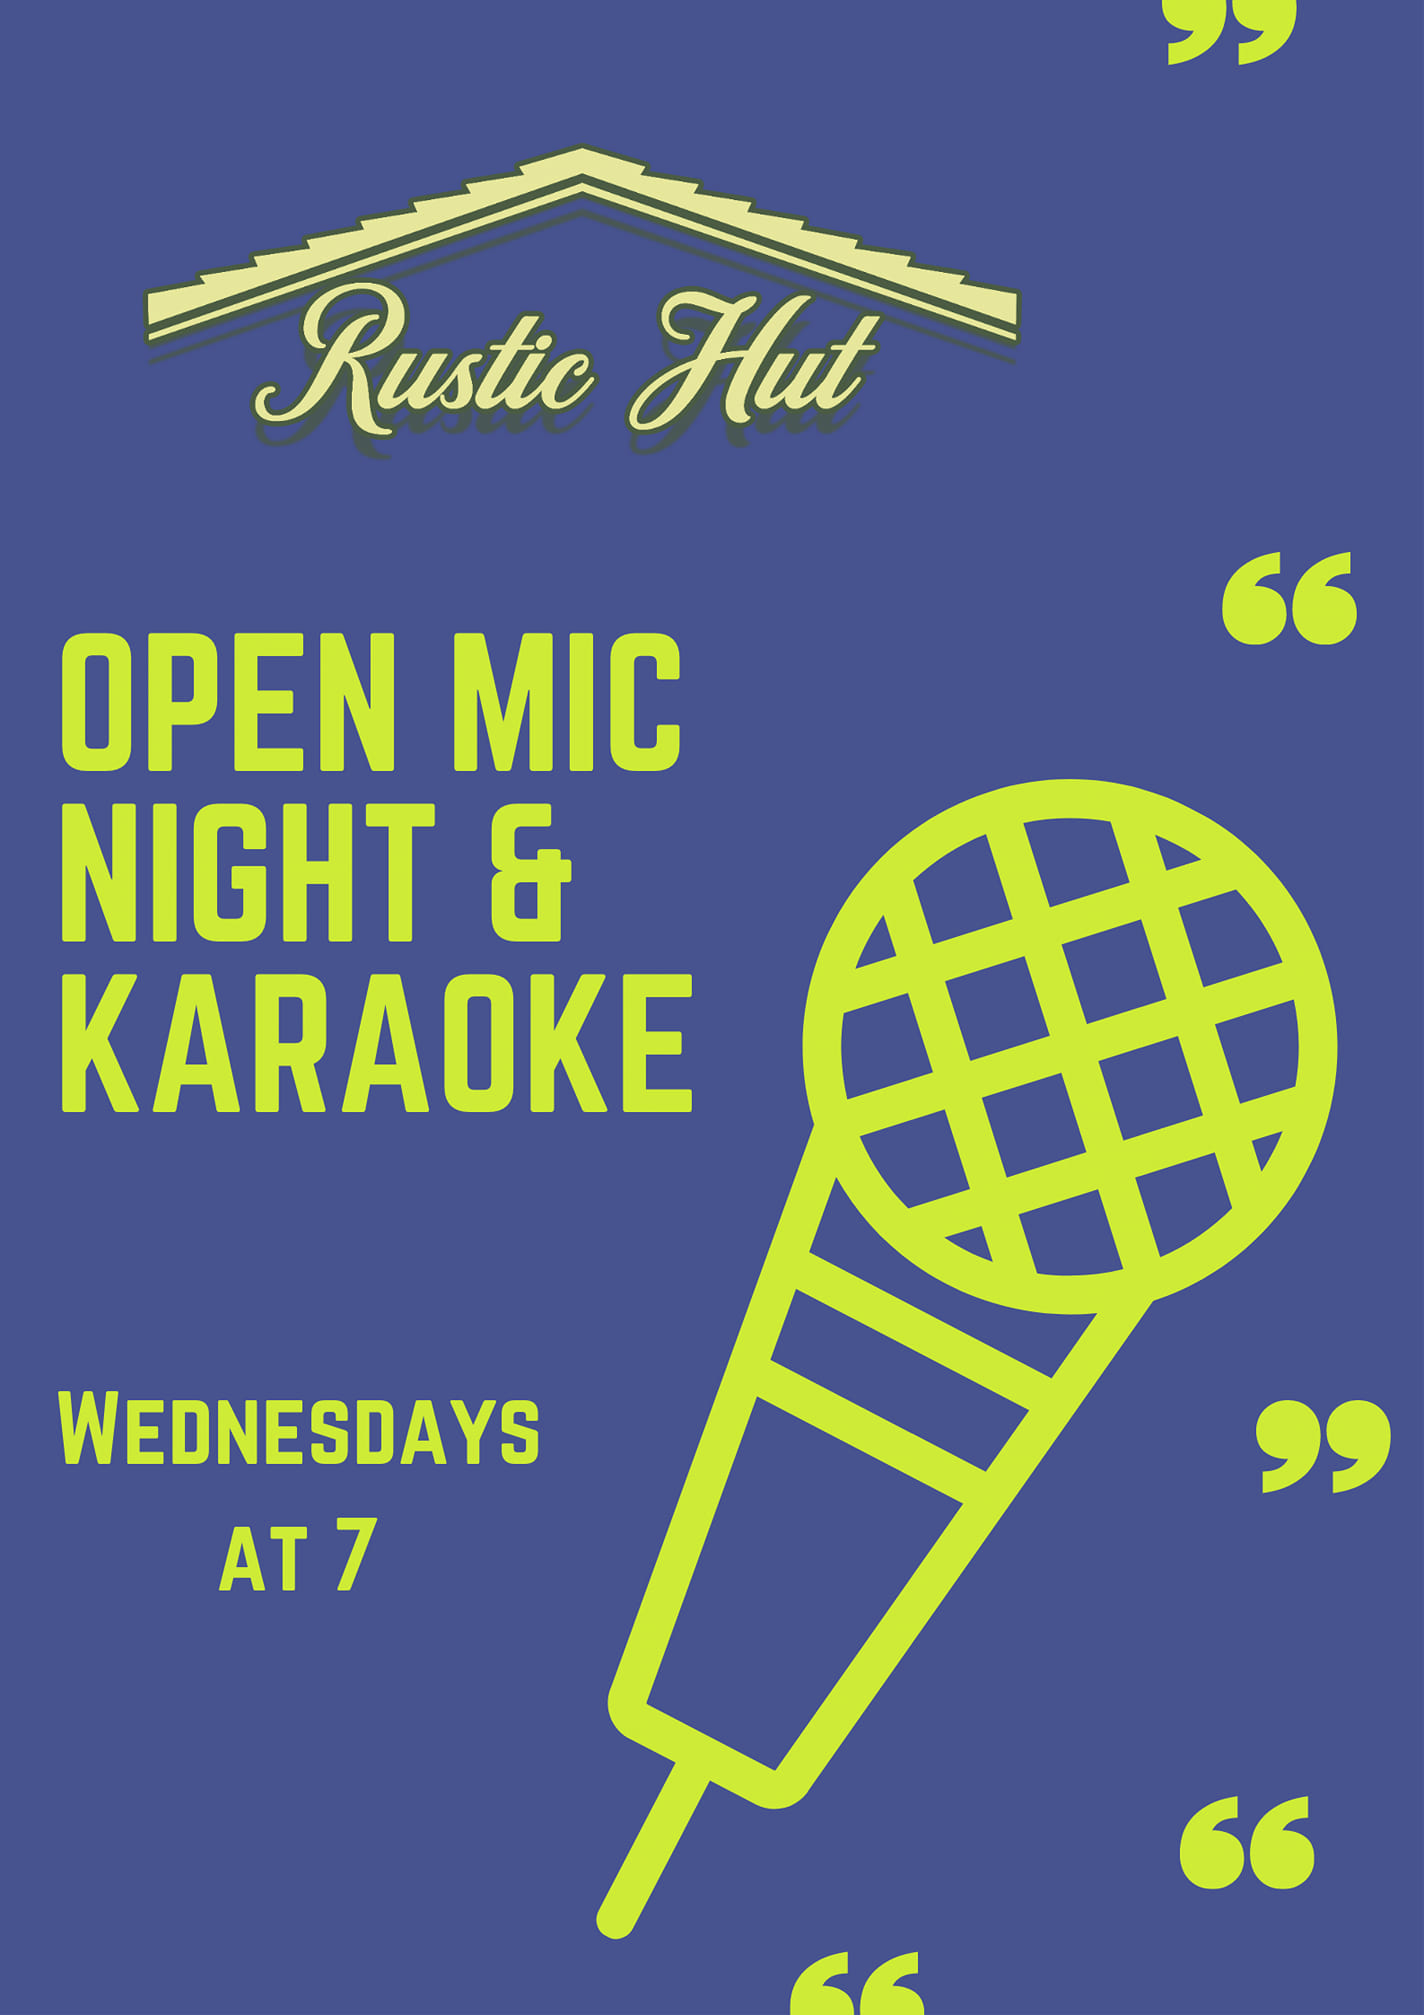 Open Mic & Karaoke Wednesday Night at The Rustic Hut in Florence, Montana